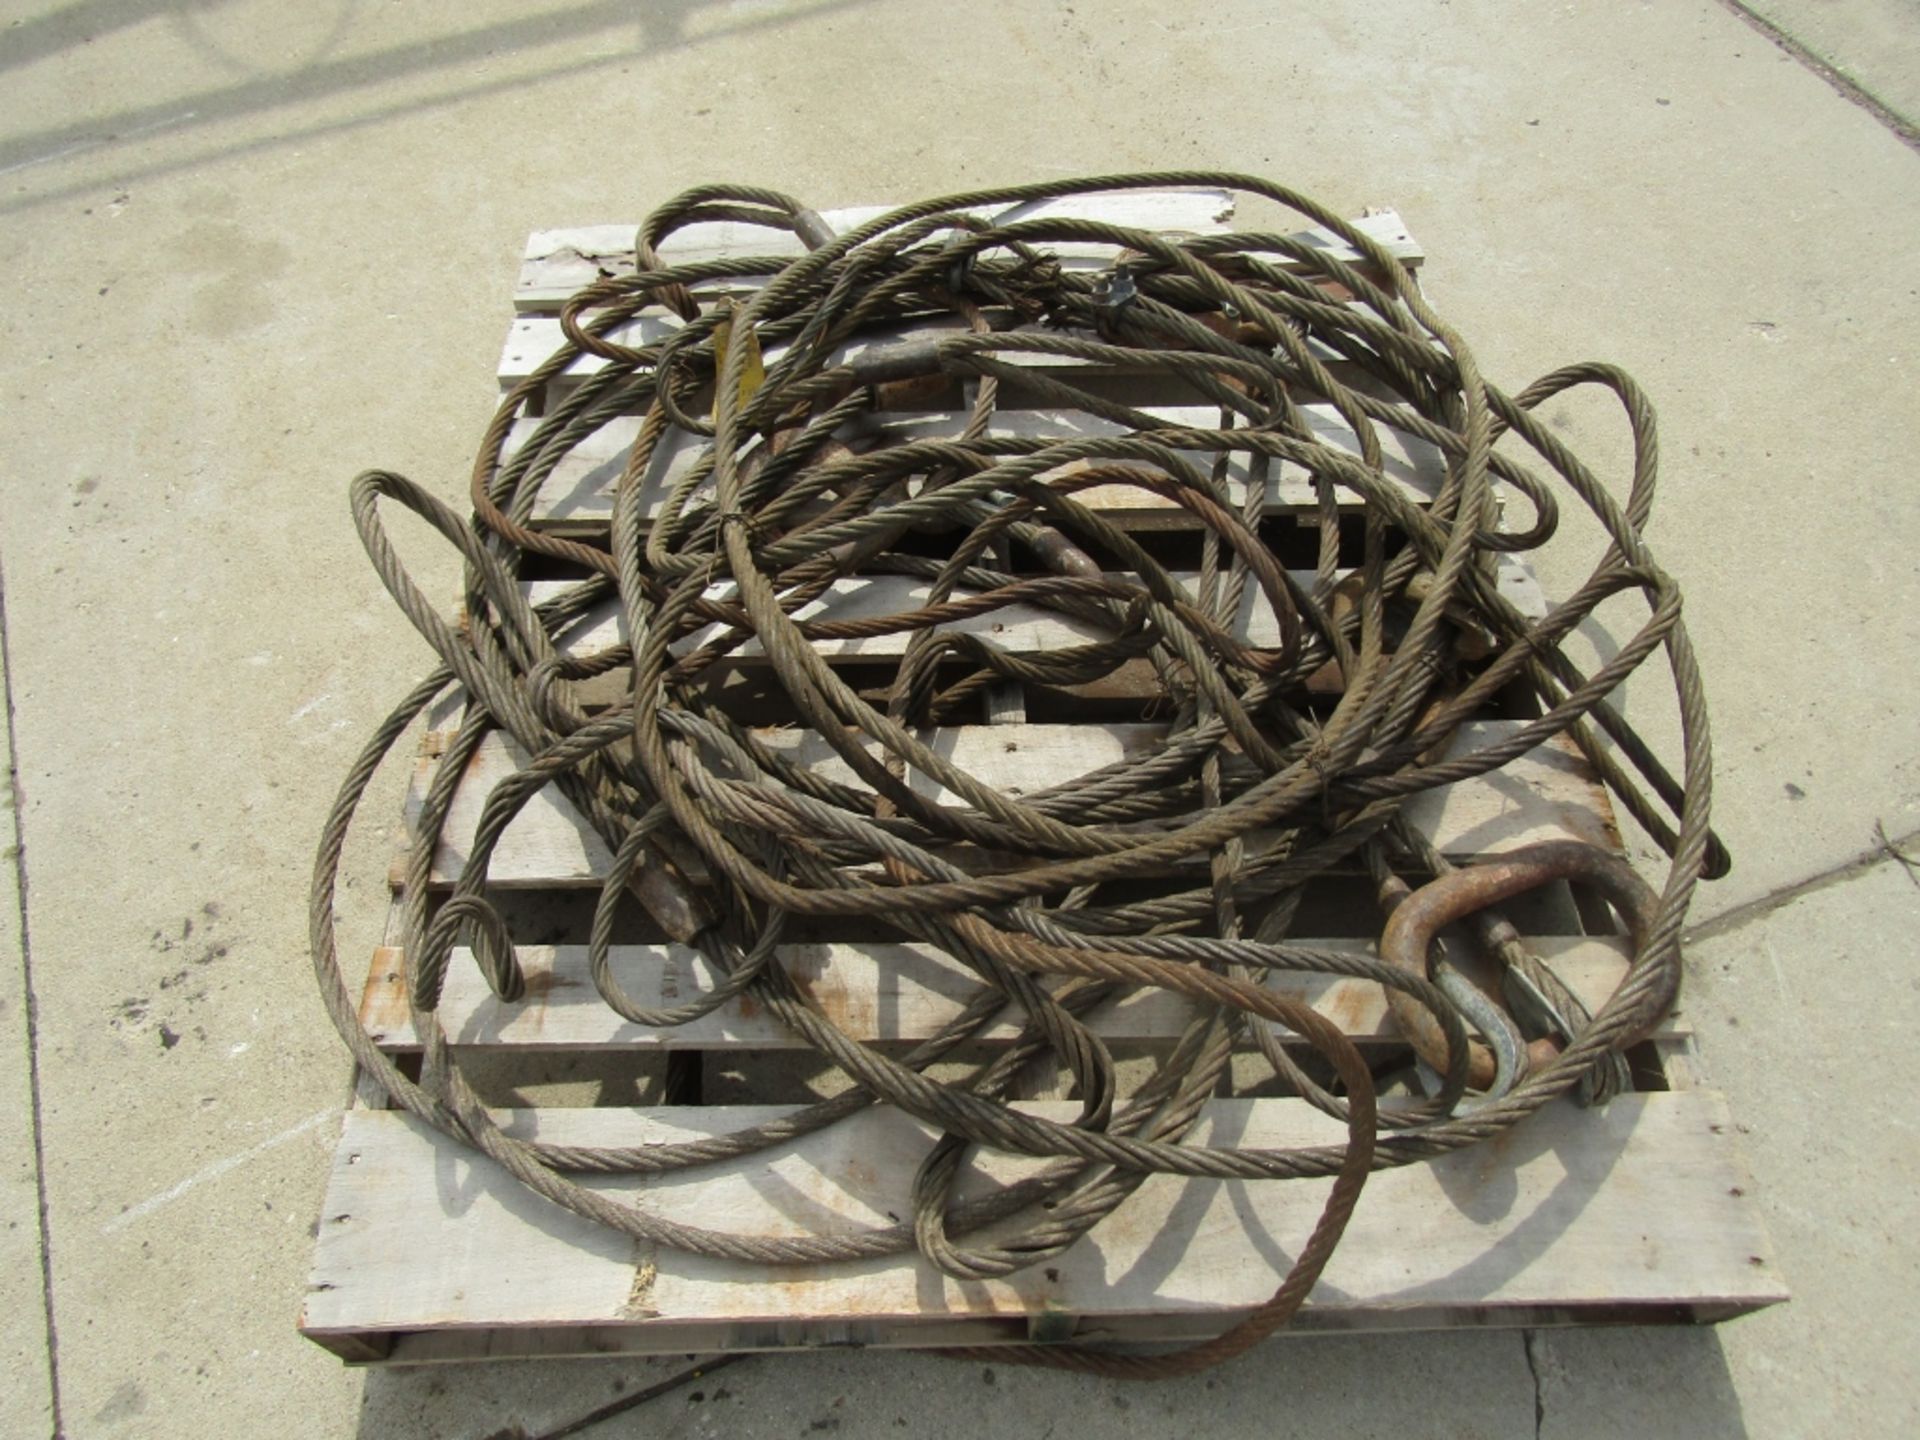 Pallet of Chocker Cables